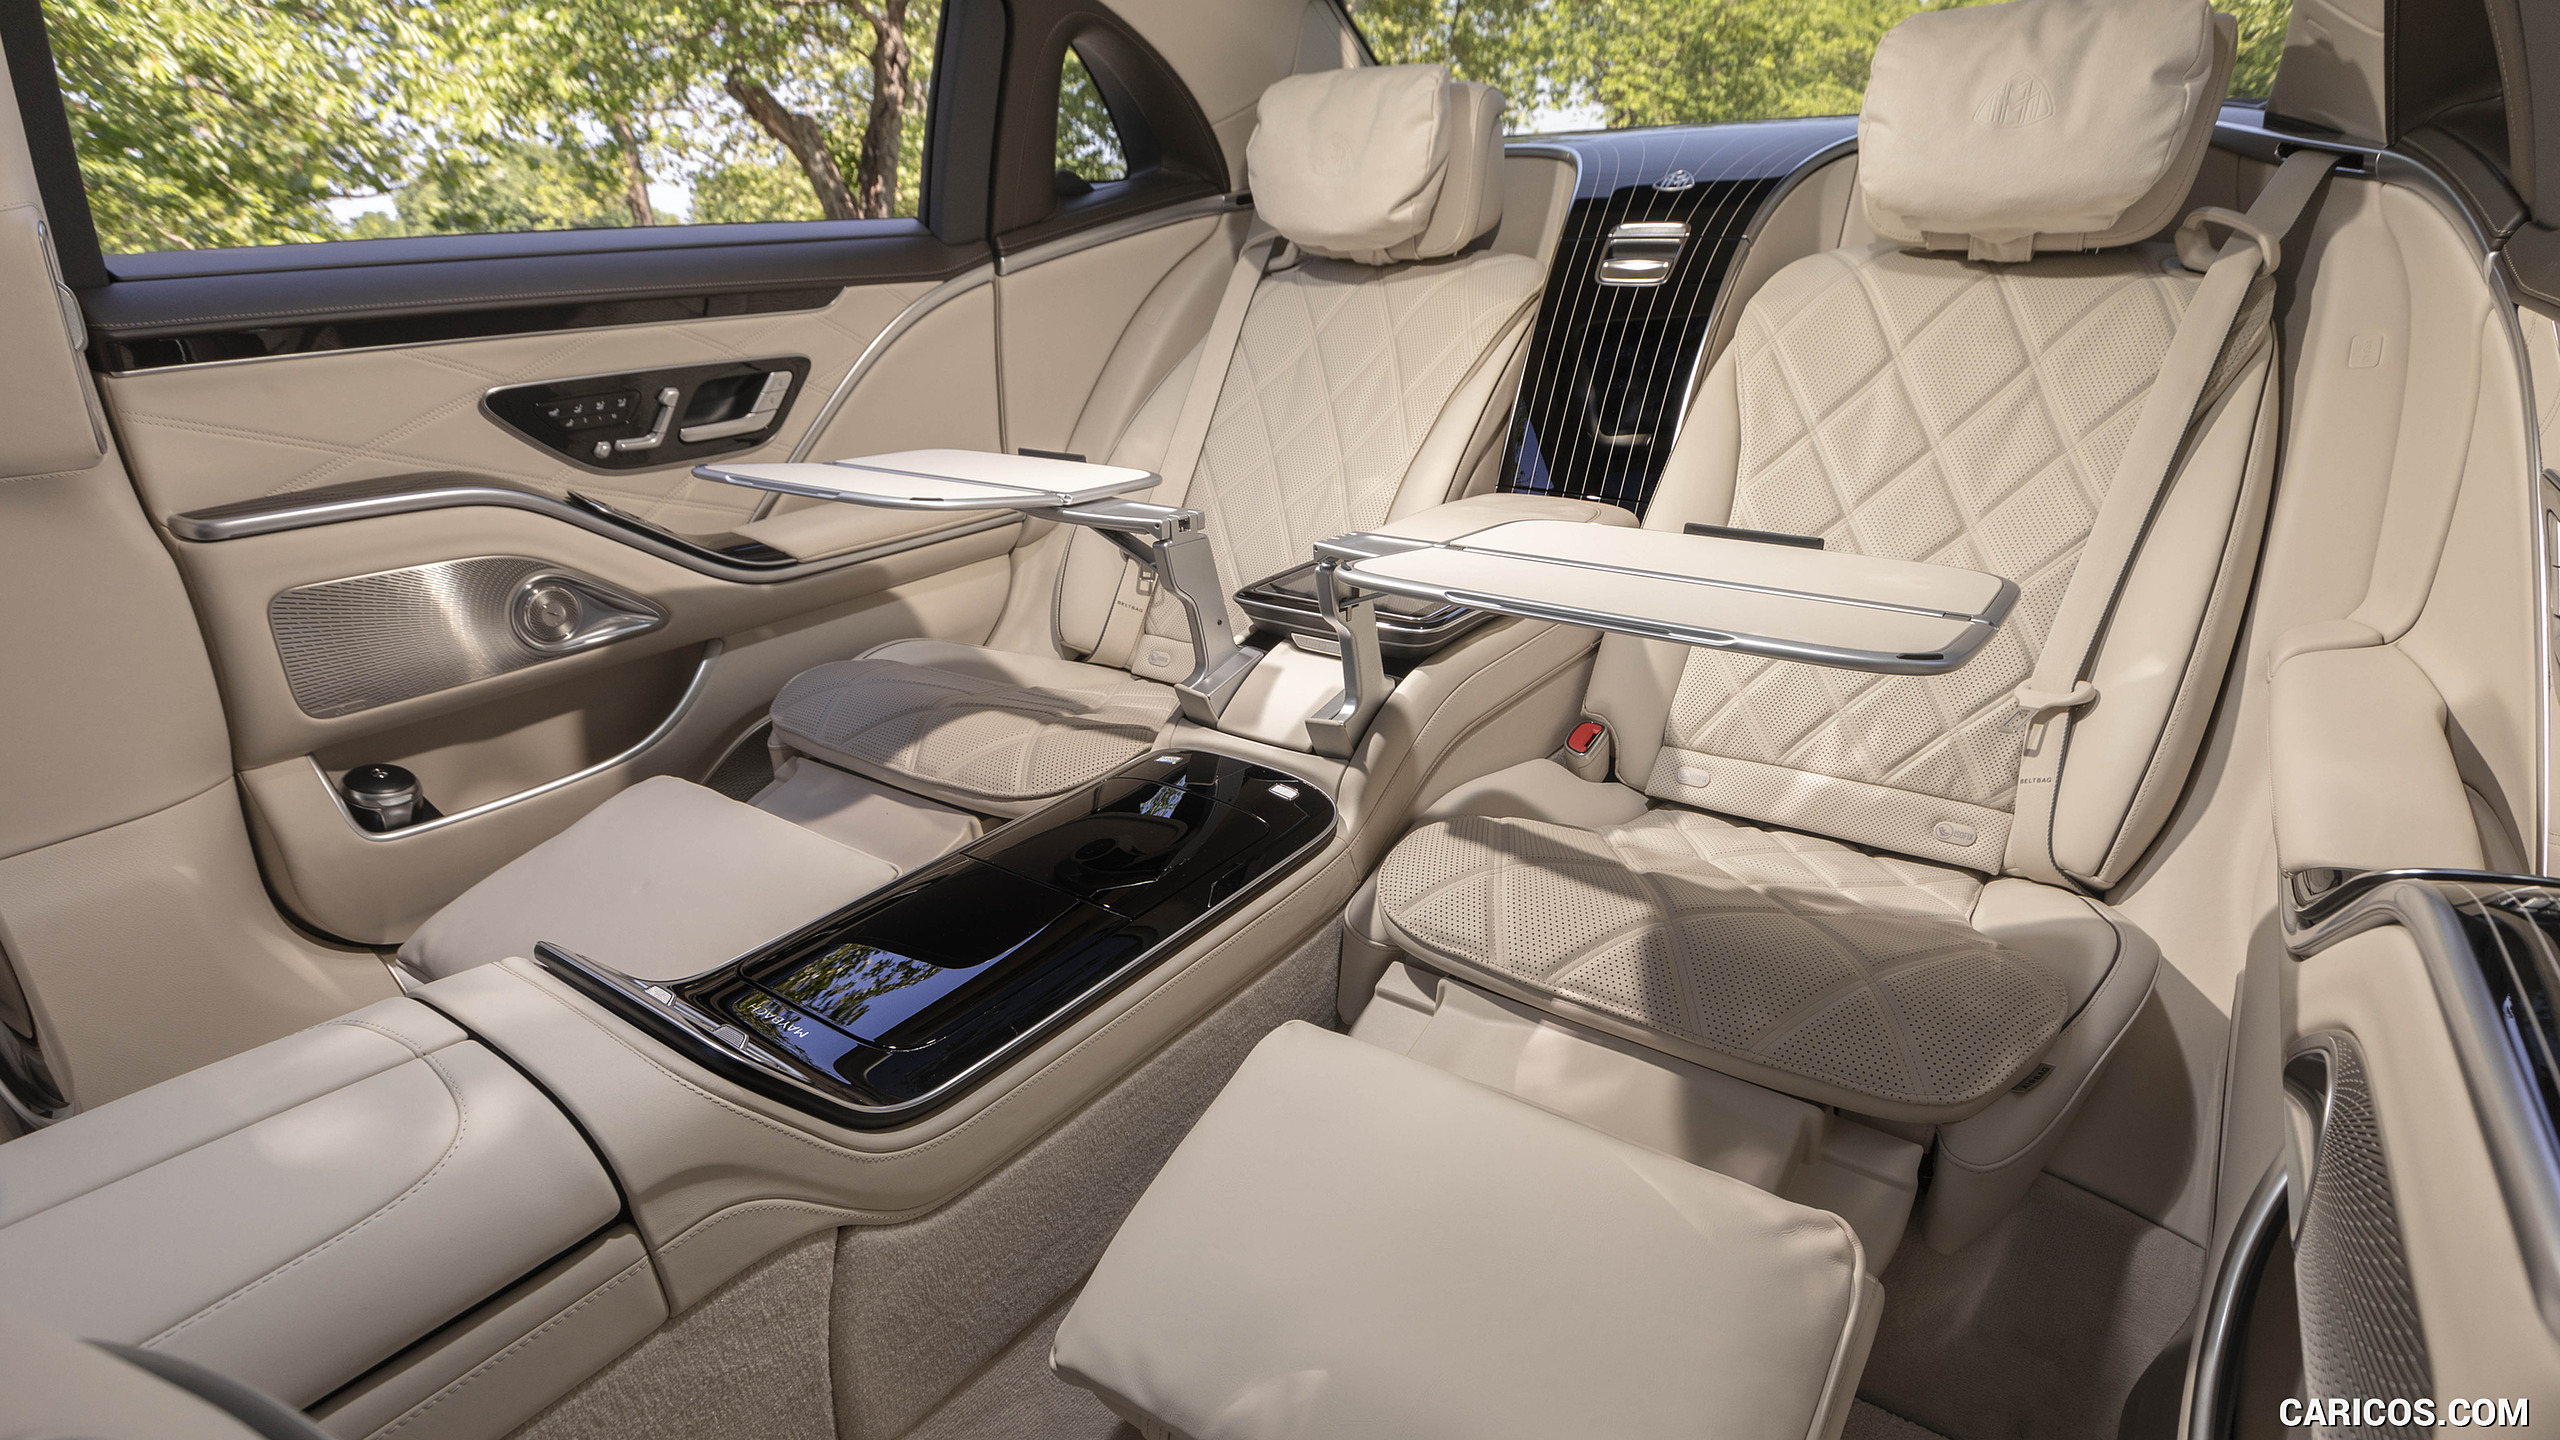 2022 Mercedes-Maybach S 680 4MATIC (US-Spec) - Interior, Rear Seats, #80 of 173